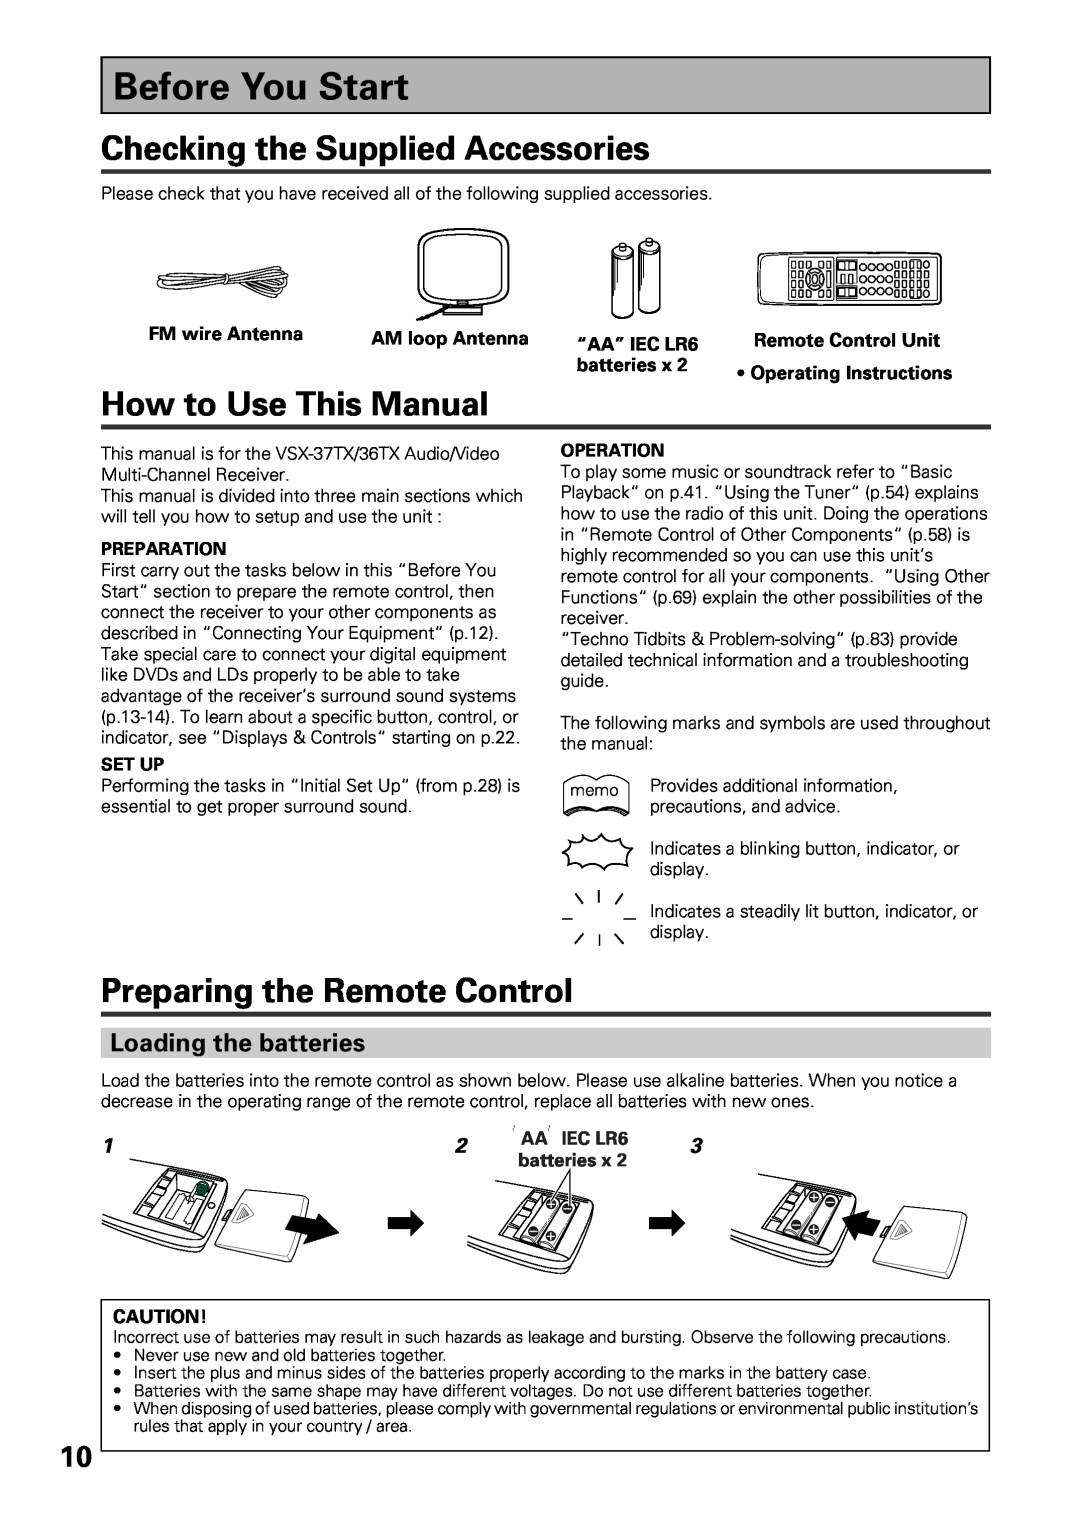 Pioneer VSX-36TX Before You Start, Checking the Supplied Accessories, How to Use This Manual, Preparing the Remote Control 